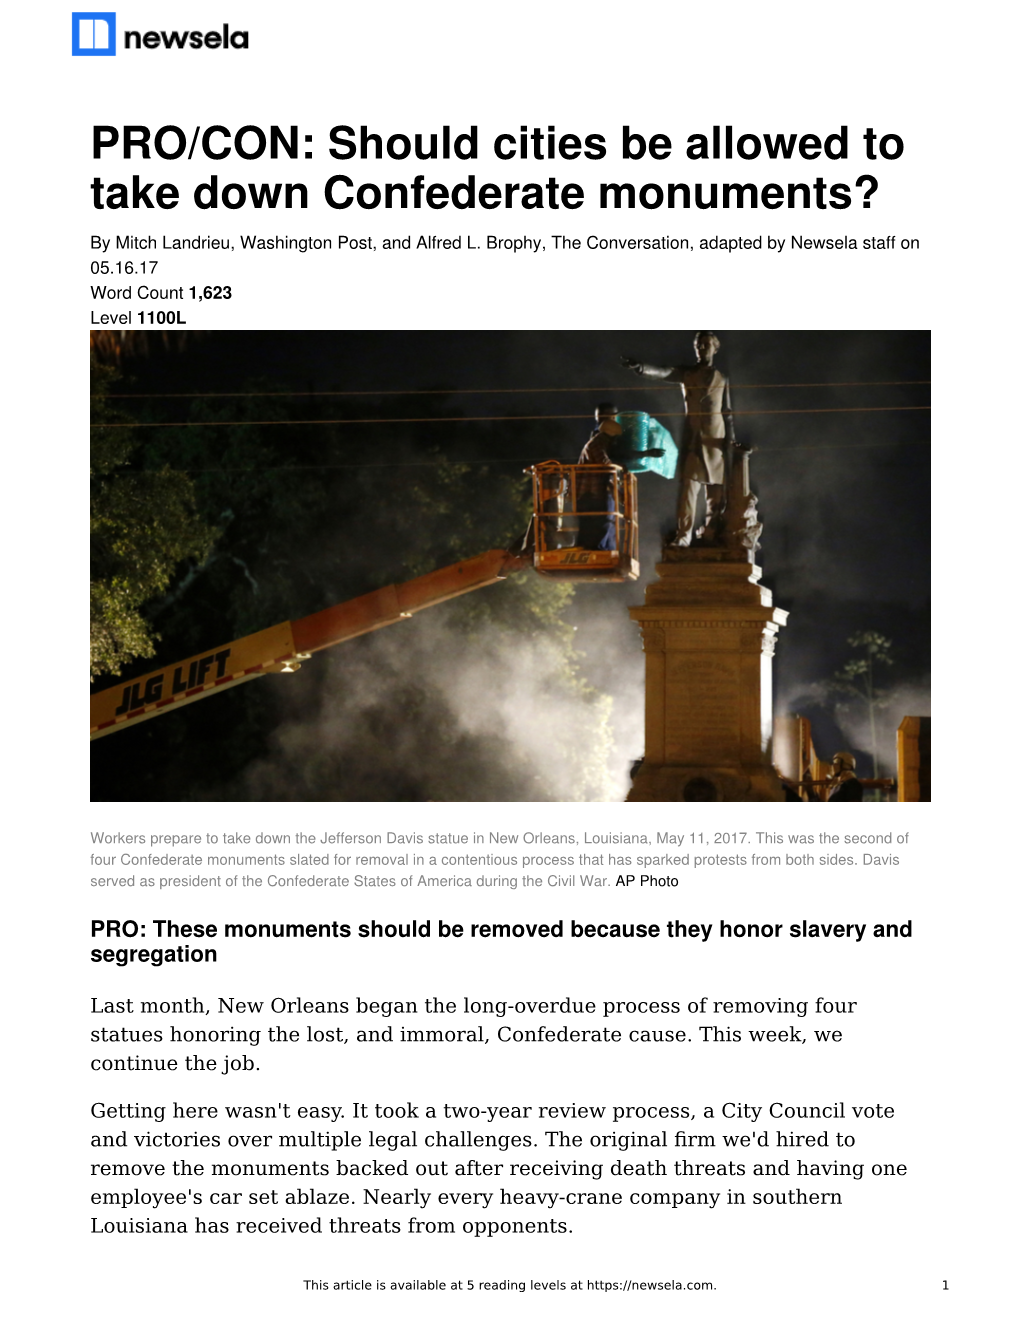 PRO/CON: Should Cities Be Allowed to Take Down Confederate Monuments? by Mitch Landrieu, Washington Post, and Alfred L